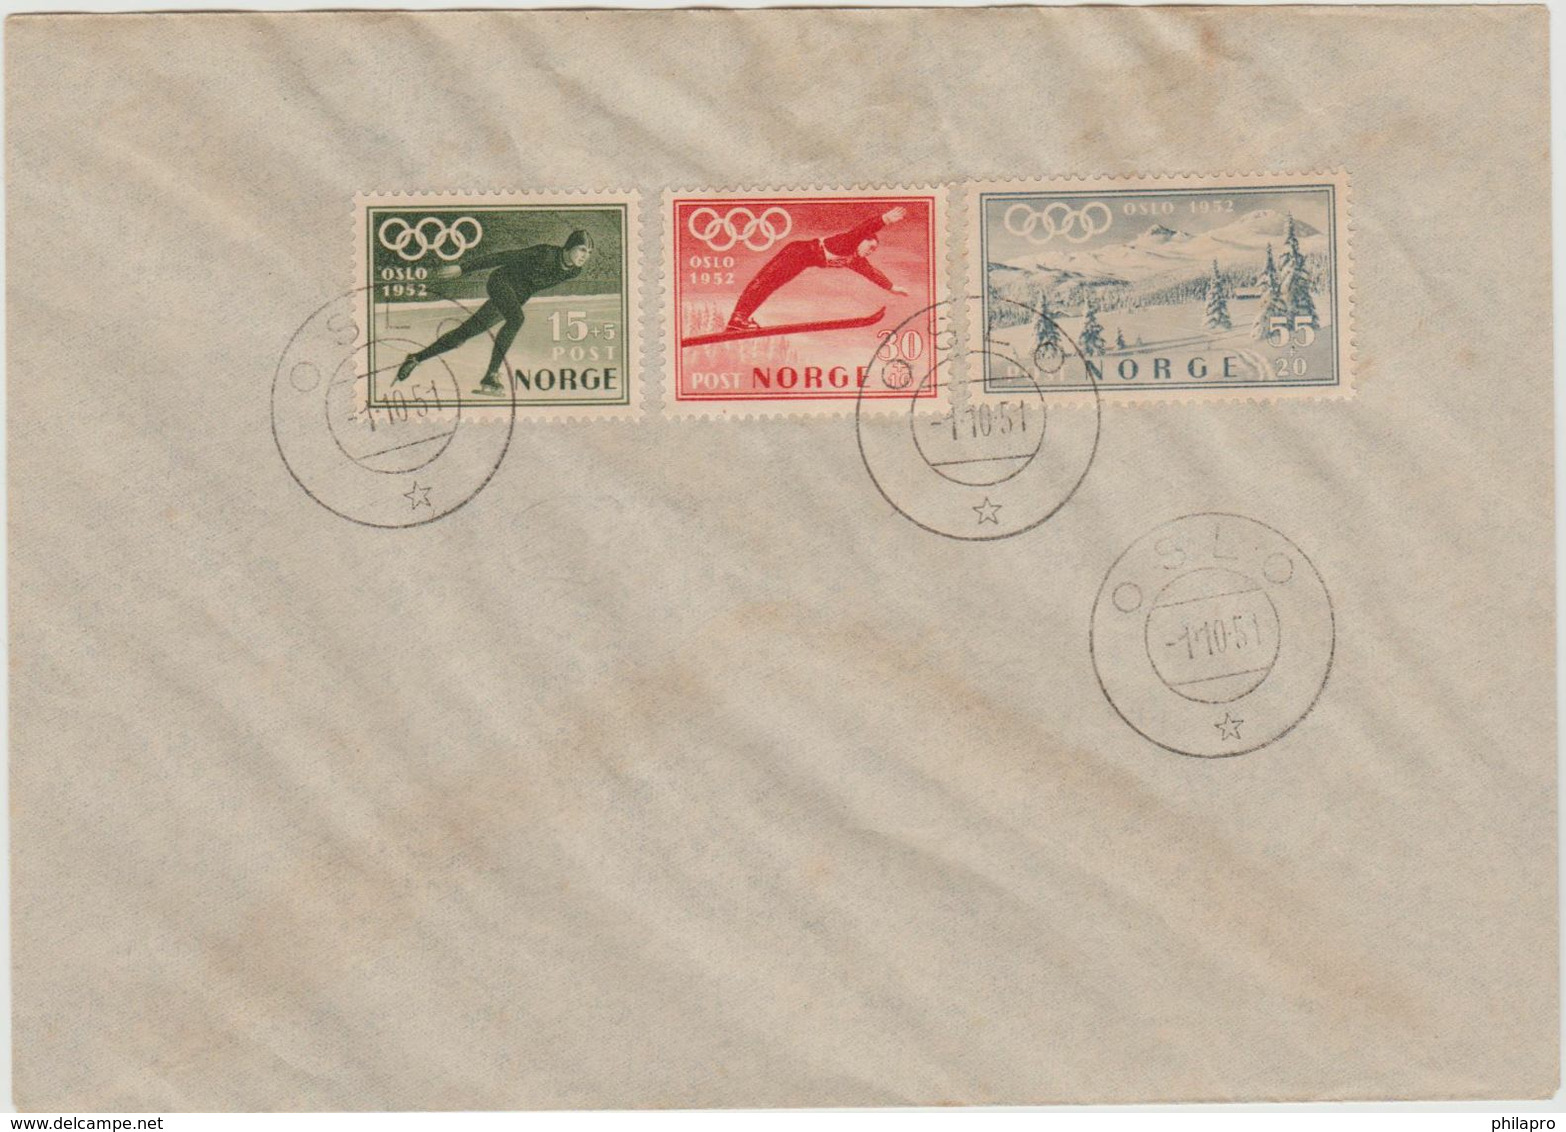 NORVEGE / NORWAY    FDC  OLYMPIC 1952  Réf  Q 556 - Inverno1952: Oslo